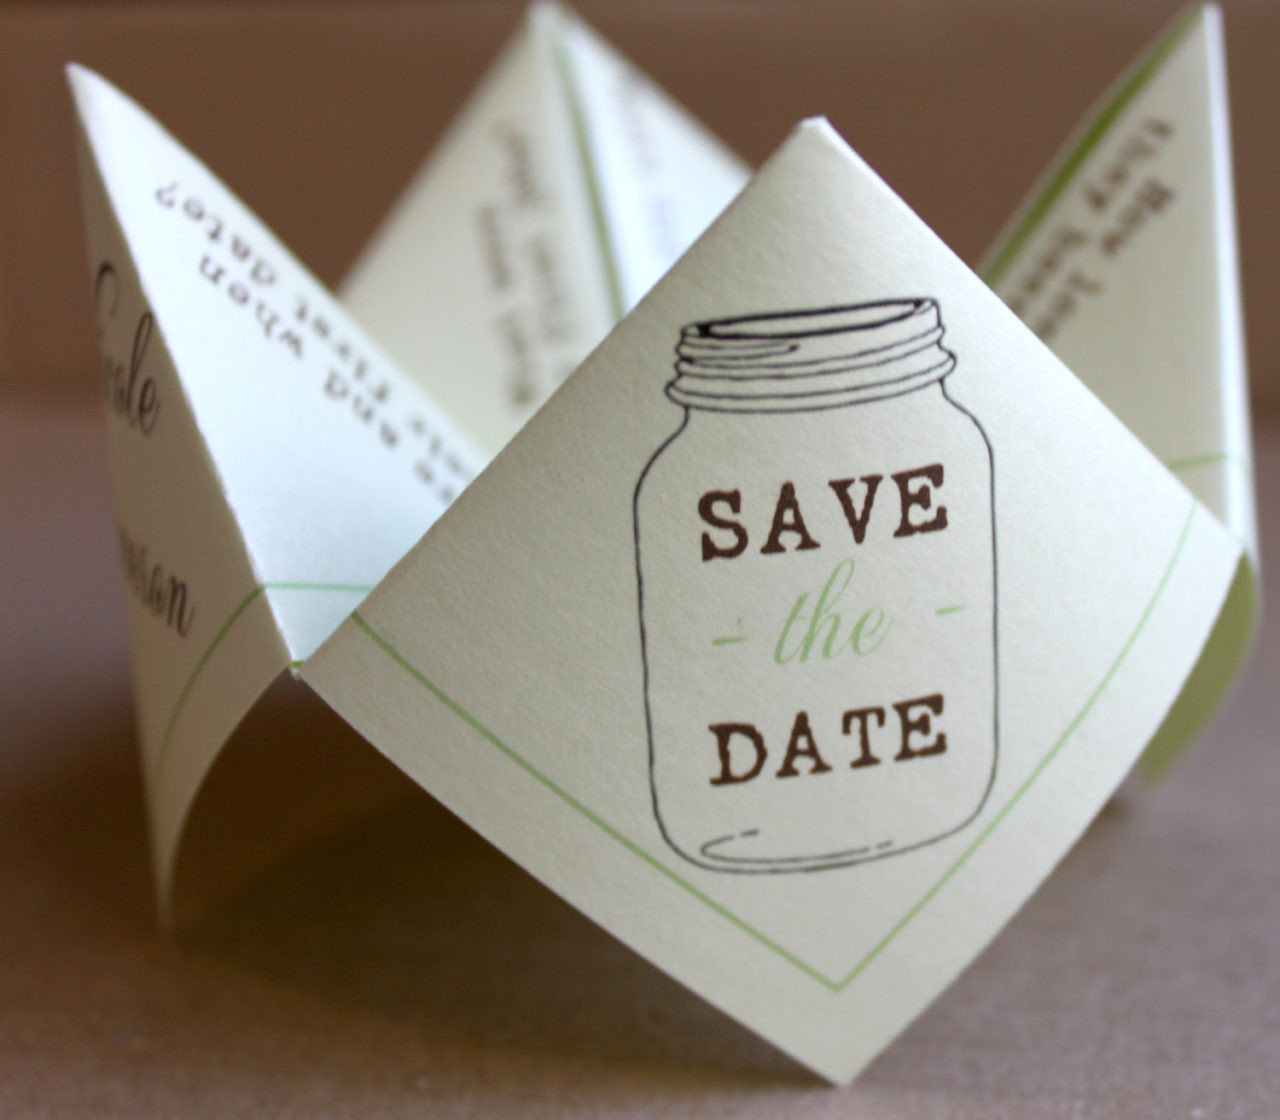 DIY Wedding Save The Dates
 15 Brilliantly Creative Save the Date Ideas